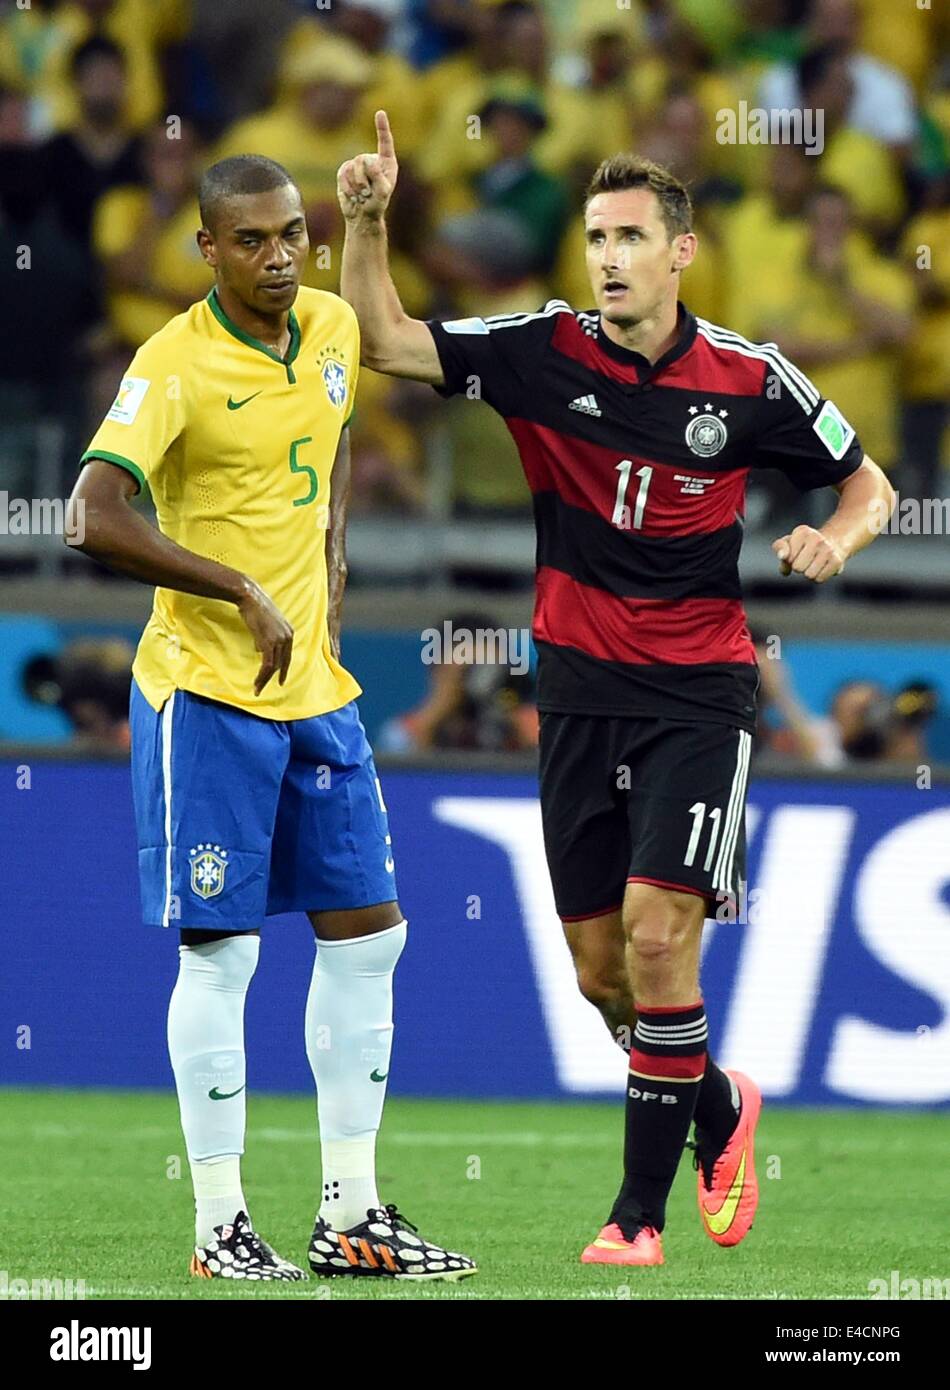 Belo Horizonte, Brazil. 8th July, 2014. Germany's Miroslav Klose (R) celebrates after scoring a goal during a semifinal match between Brazil and Germany of 2014 FIFA World Cup at the Estadio Mineirao Stadium in Belo Horizonte, Brazil, on July 8, 2014. Credit:  Liu Dawei/Xinhua/Alamy Live News Stock Photo